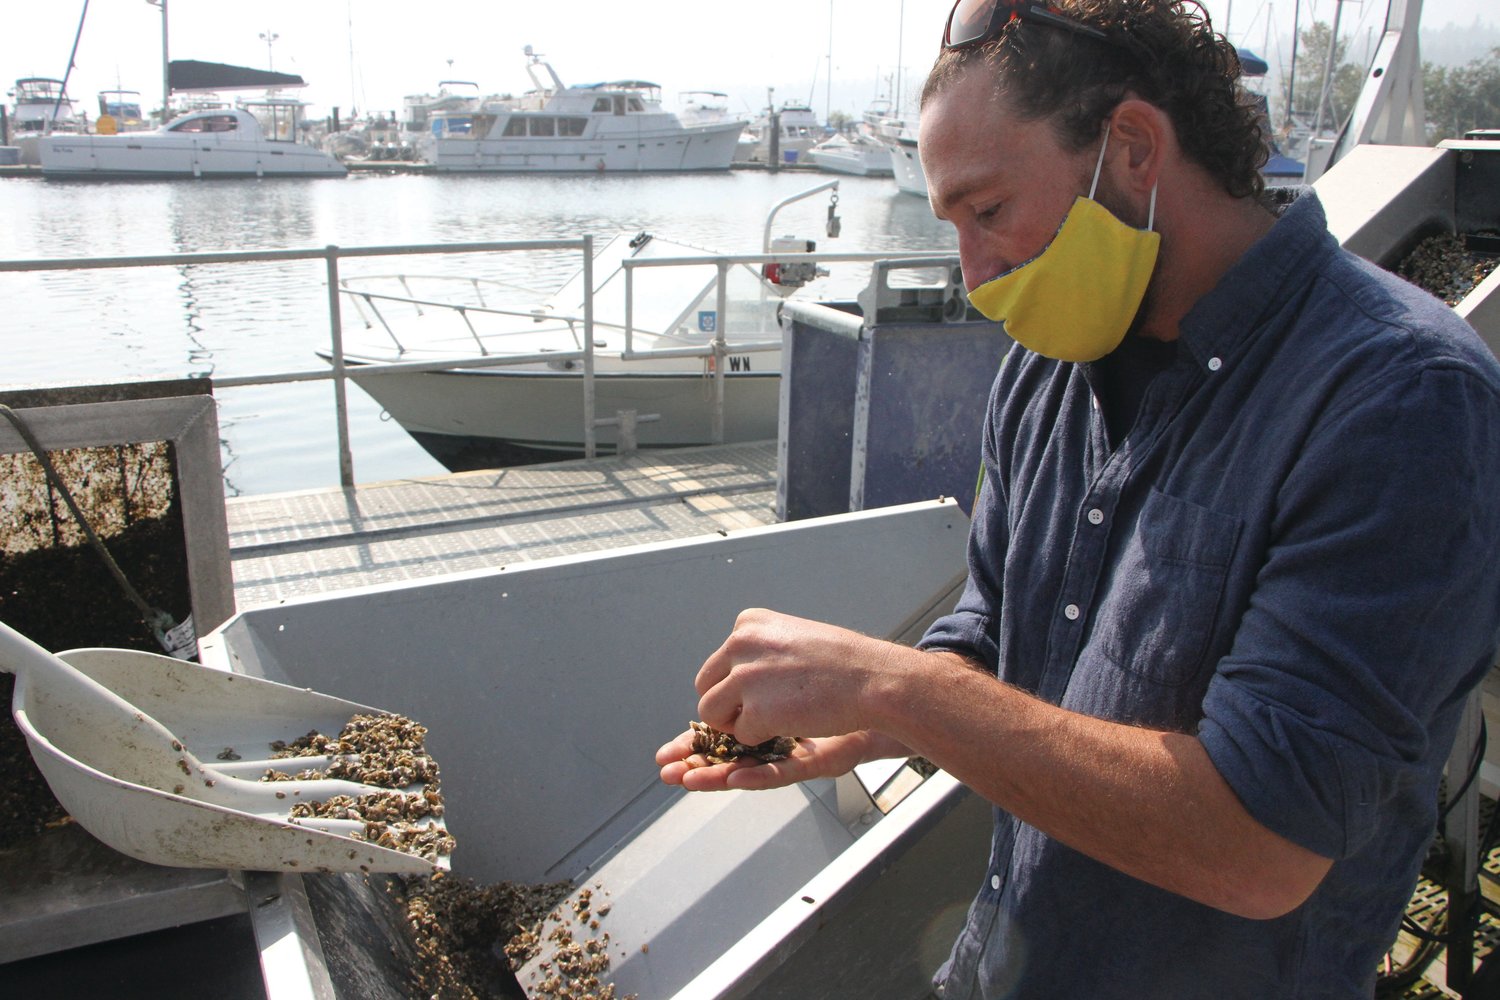 Ralph Riccio, a biologist with the Jamestown S’Klallam Tribe’s aquaculture program, holds up a handful of young Pacific oysters at the John Wayne Marina.